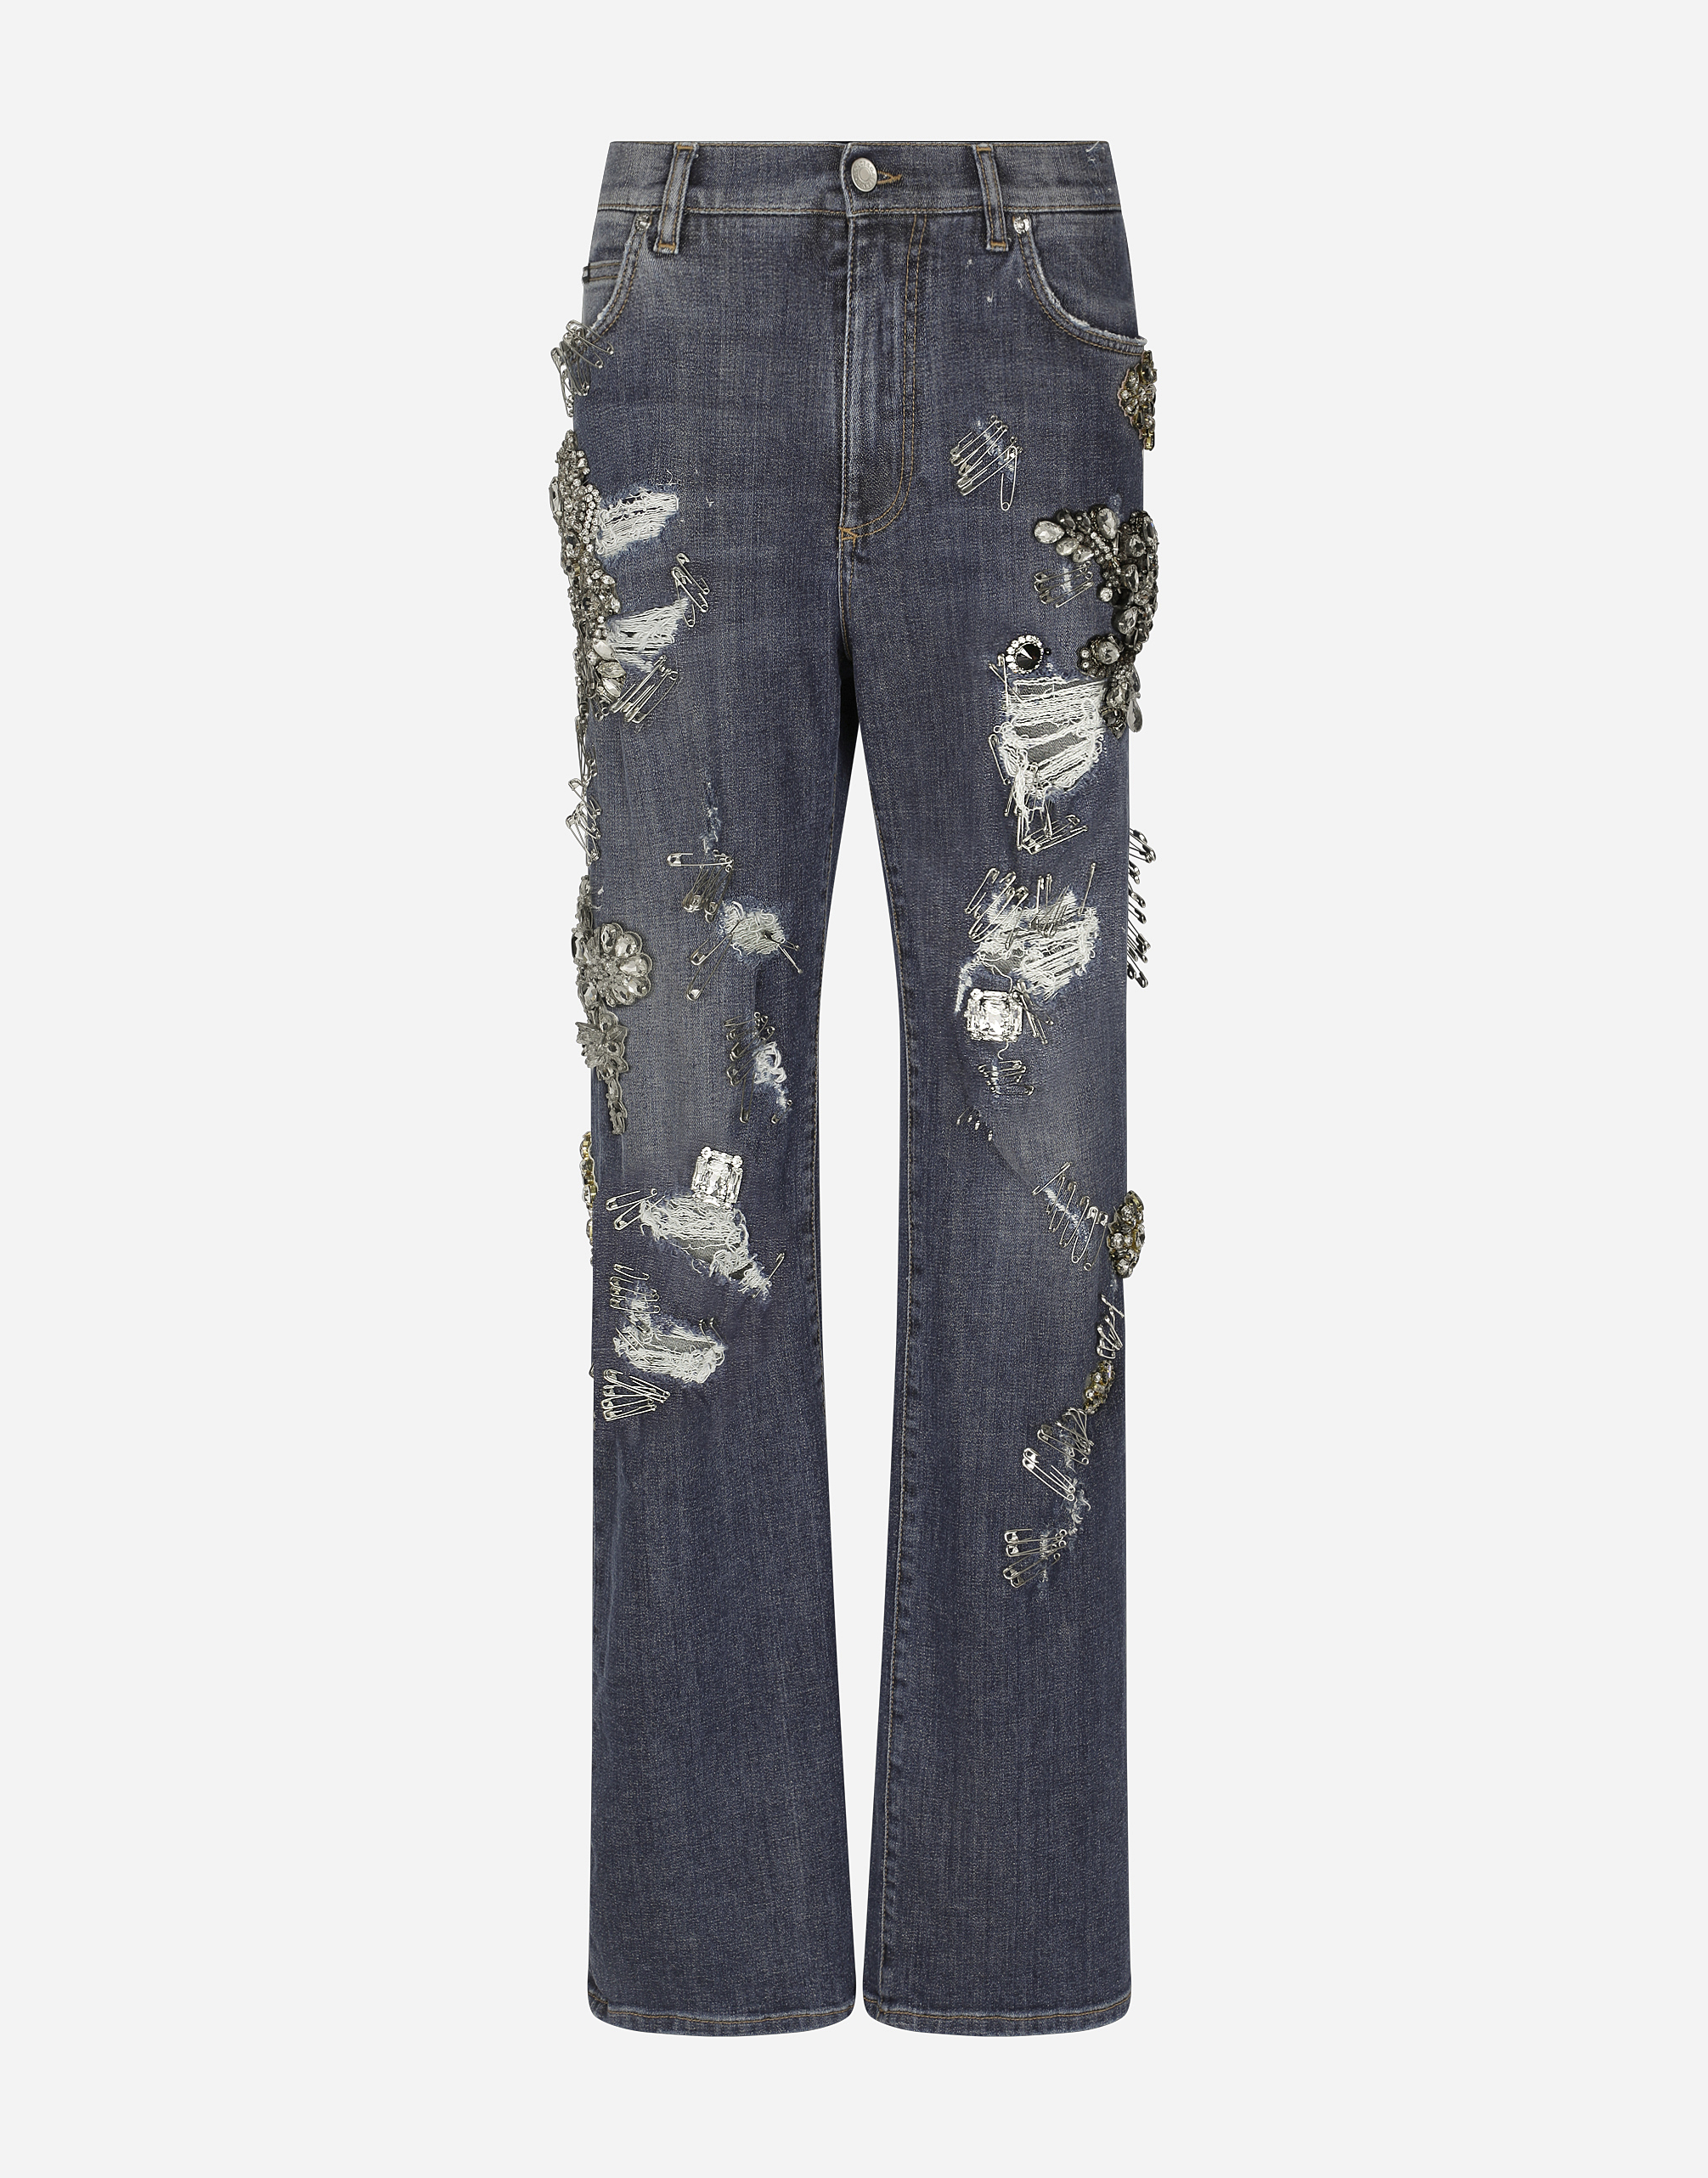 Denim jeans with ripped details and appliqués in Multicolor